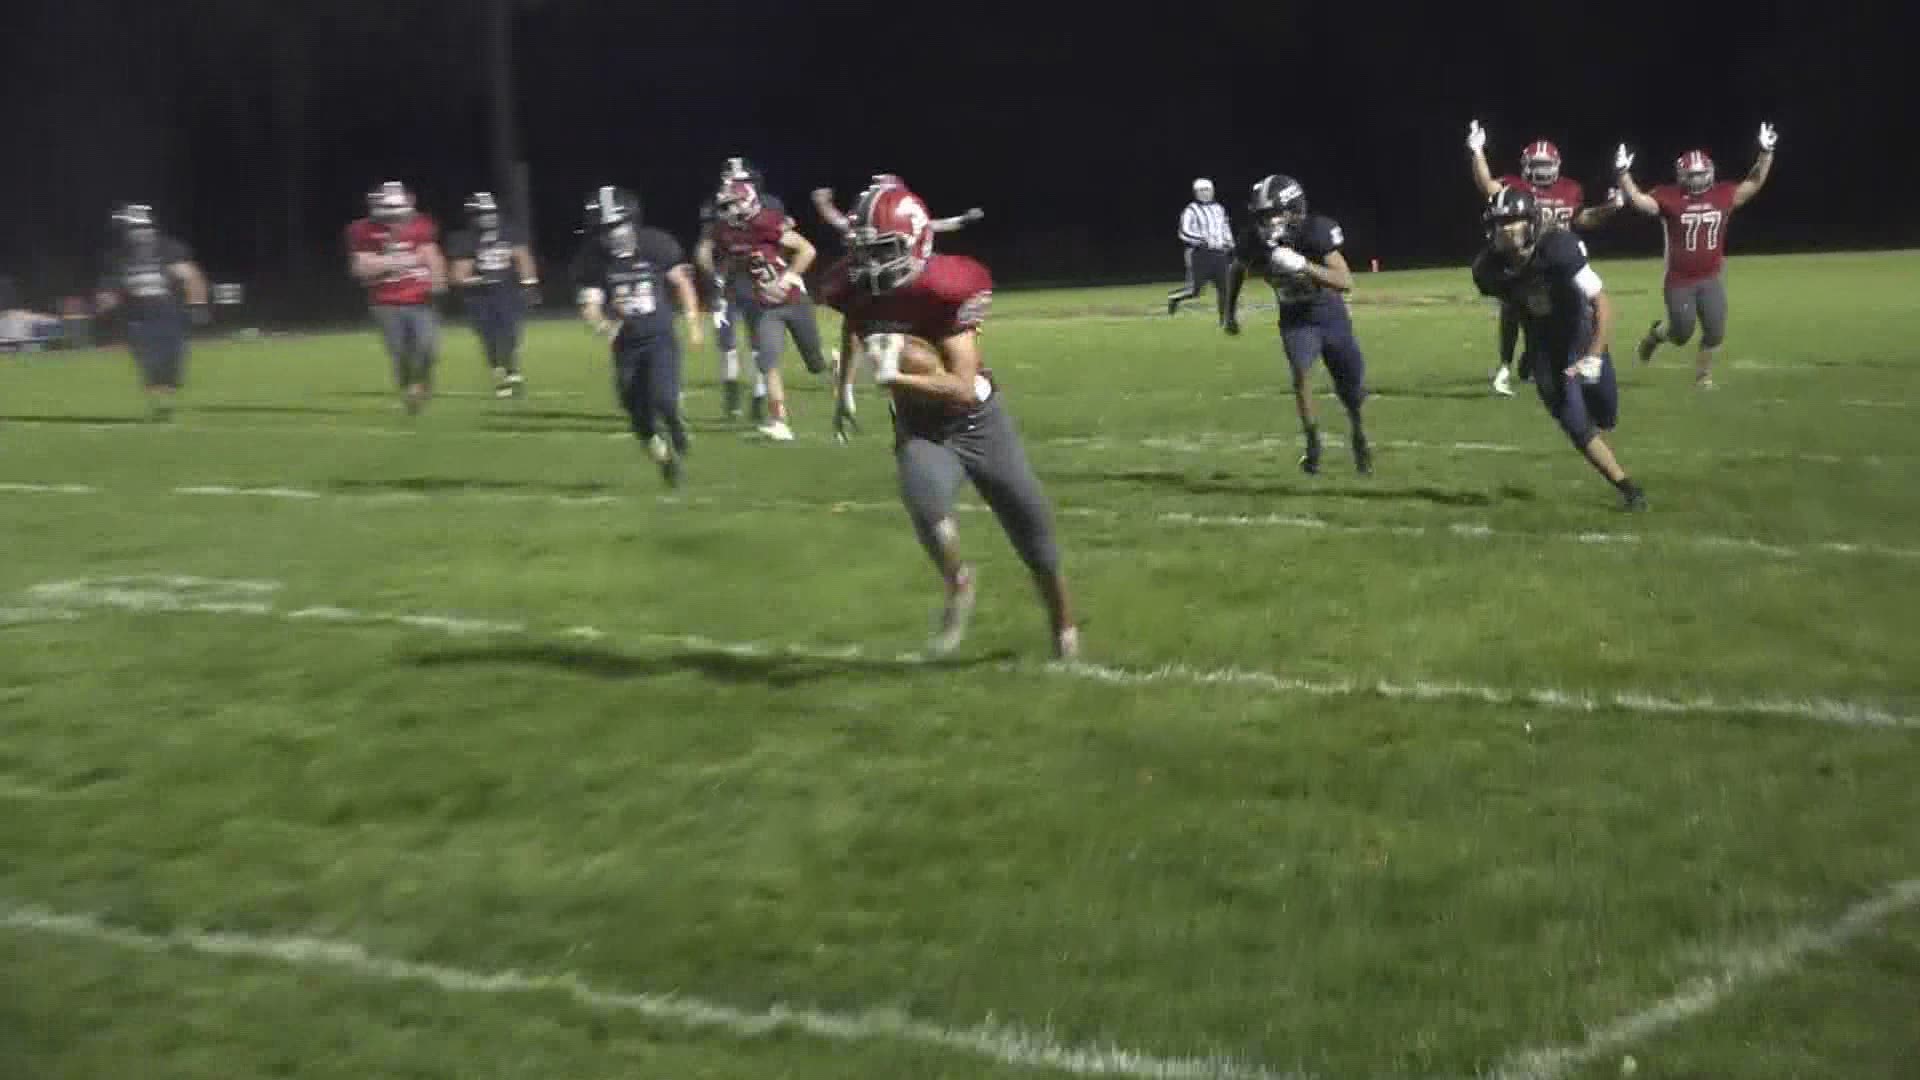 Highlights from Spring Lake vs. Fruitport in the Battle of the Bayou